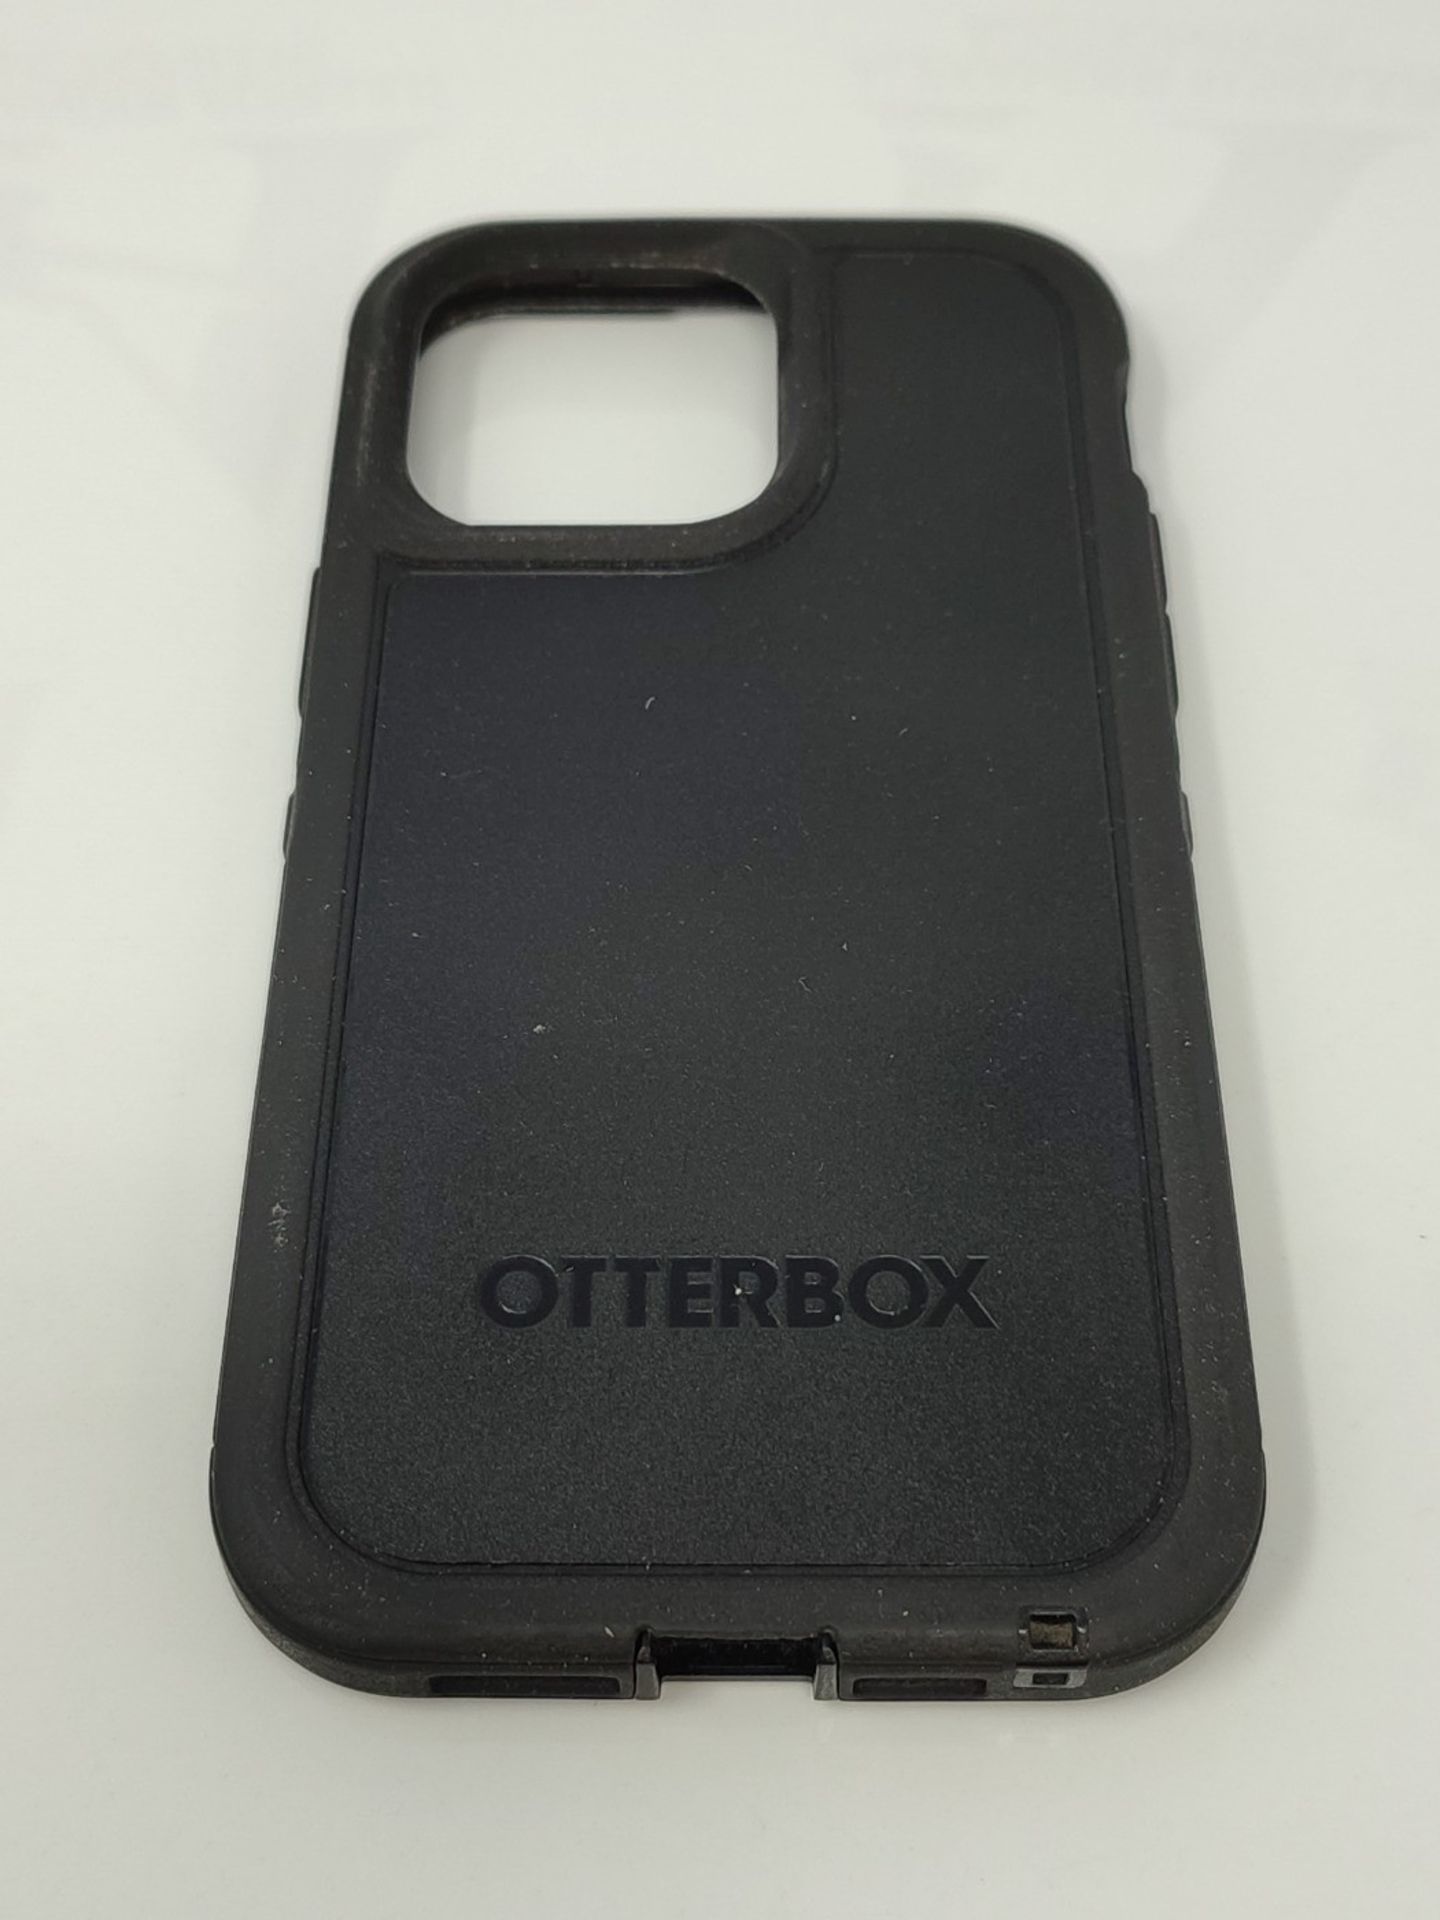 OtterBox Defender XT Case for iPhone 14 Pro Max with MagSafe, Shockproof, Drop proof, - Image 3 of 3